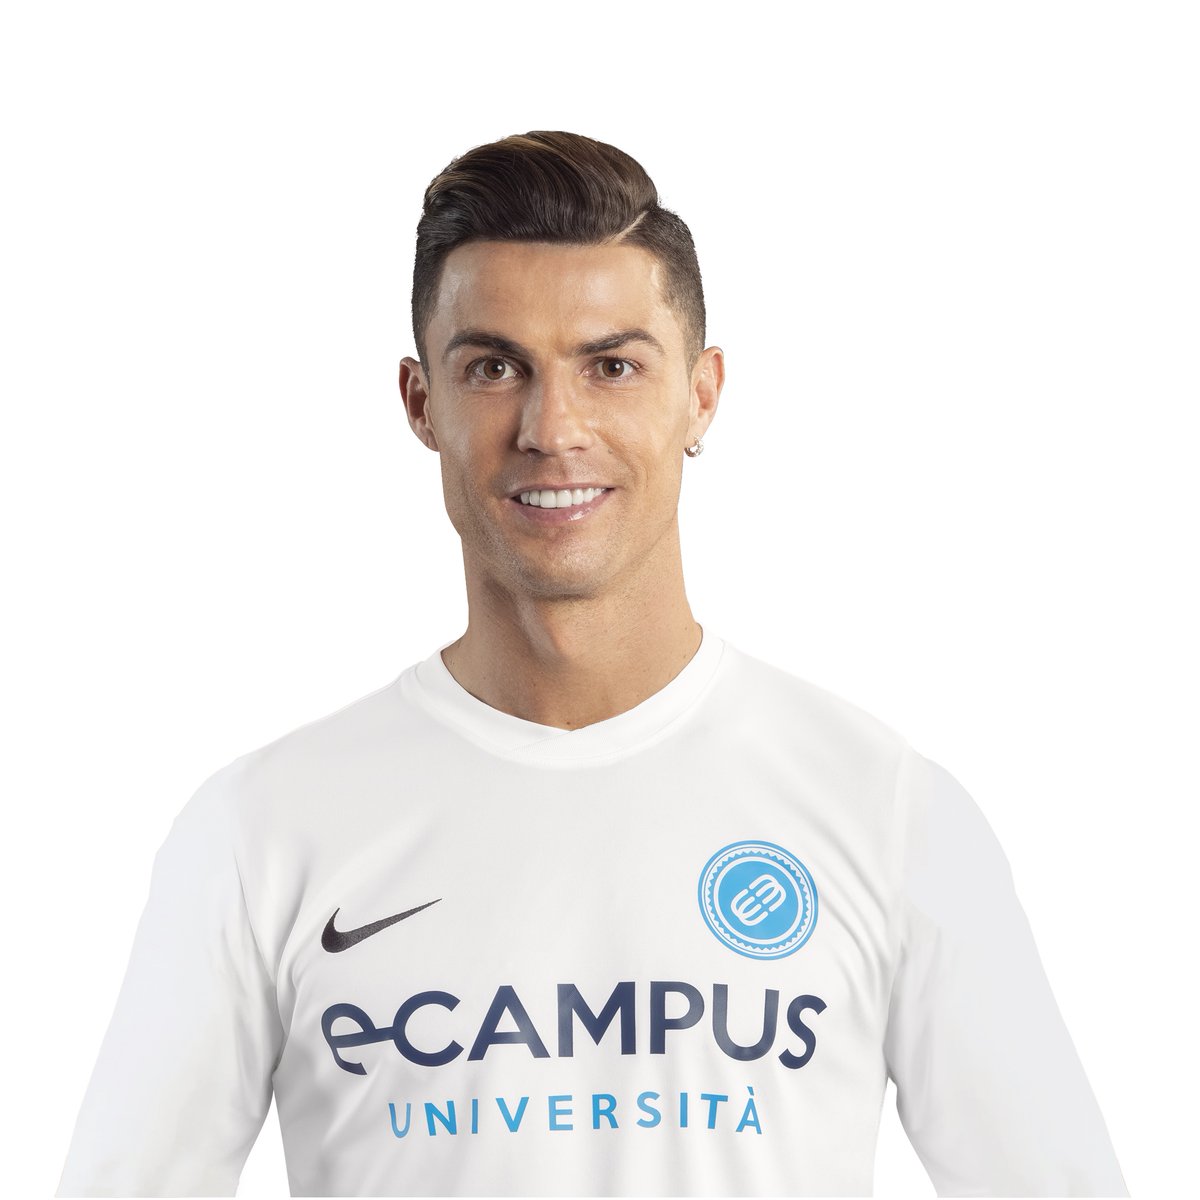 I’m very happy to support the prestigious @uni_ecampus and to have been able to donate scholarships to young people who otherwise wouldn’t have been able to study. I wish all the Università eCampus students the best for the year ahead and in building a successful future. #eCampus